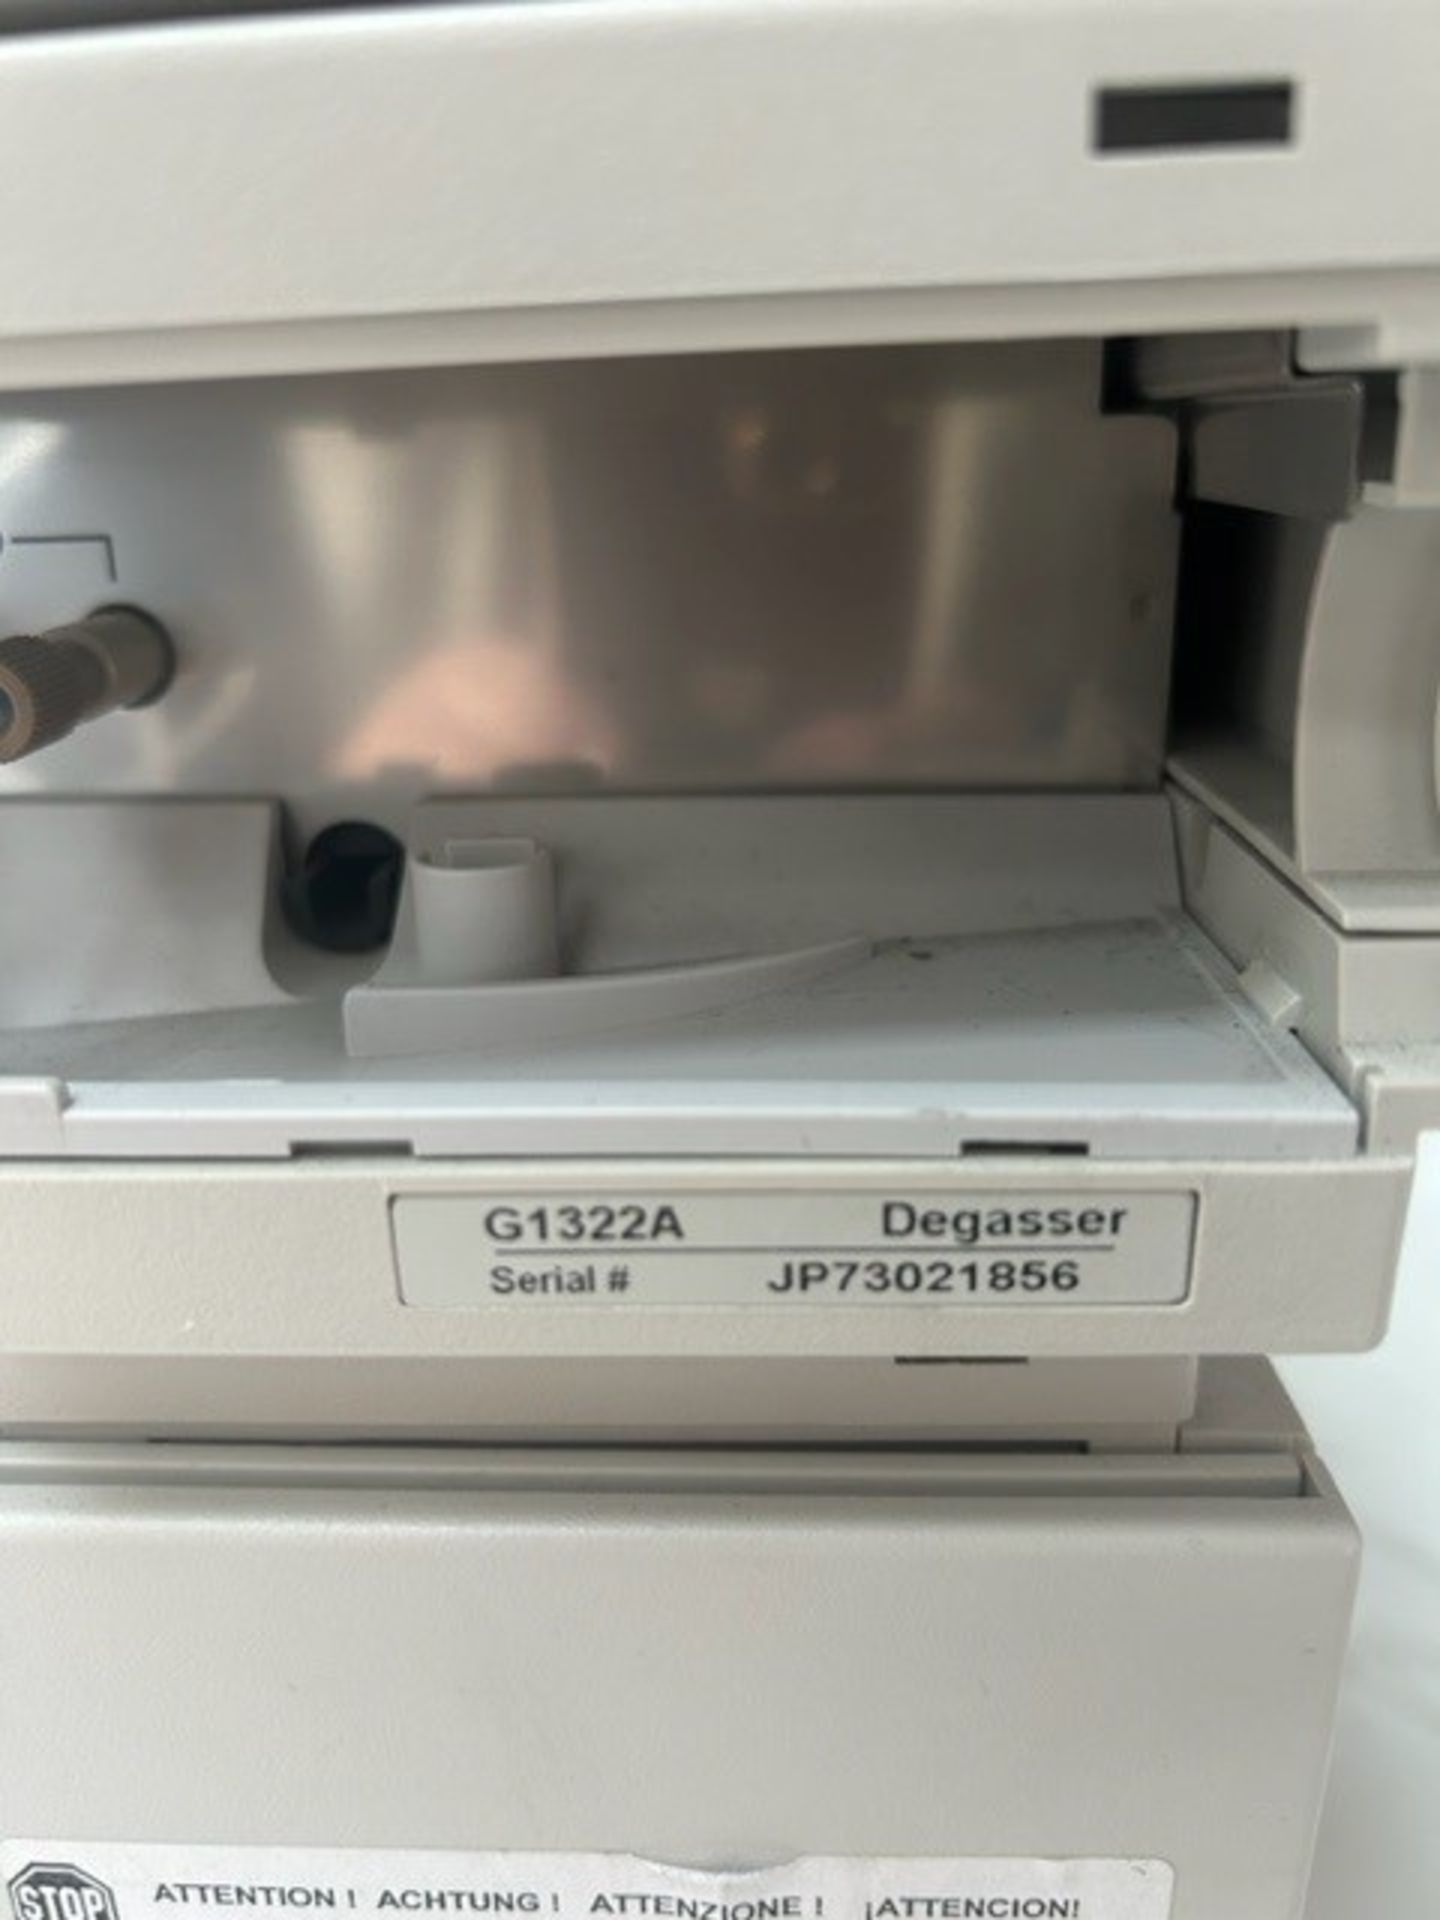 Agilent 1100 Series HPLC System - Image 4 of 7